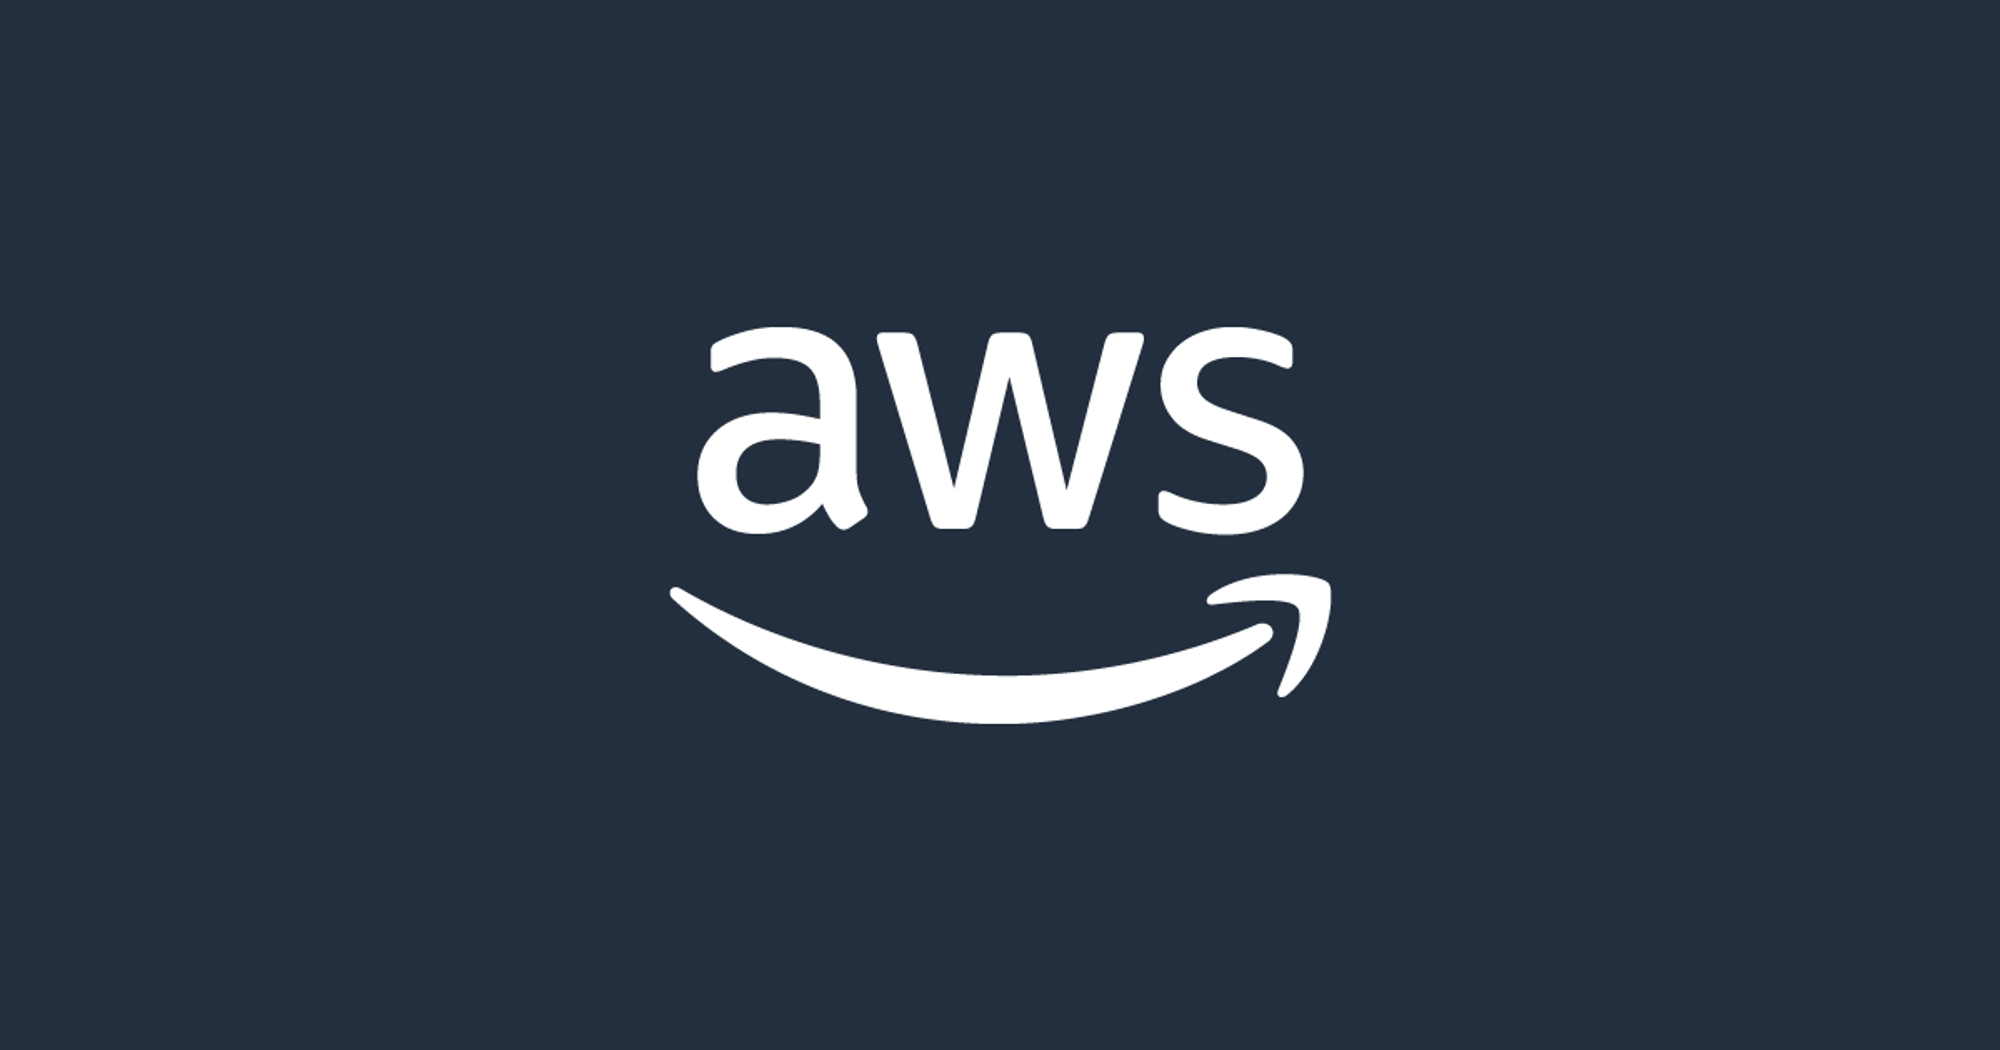 Guidance for Cell-based Architecture on AWS